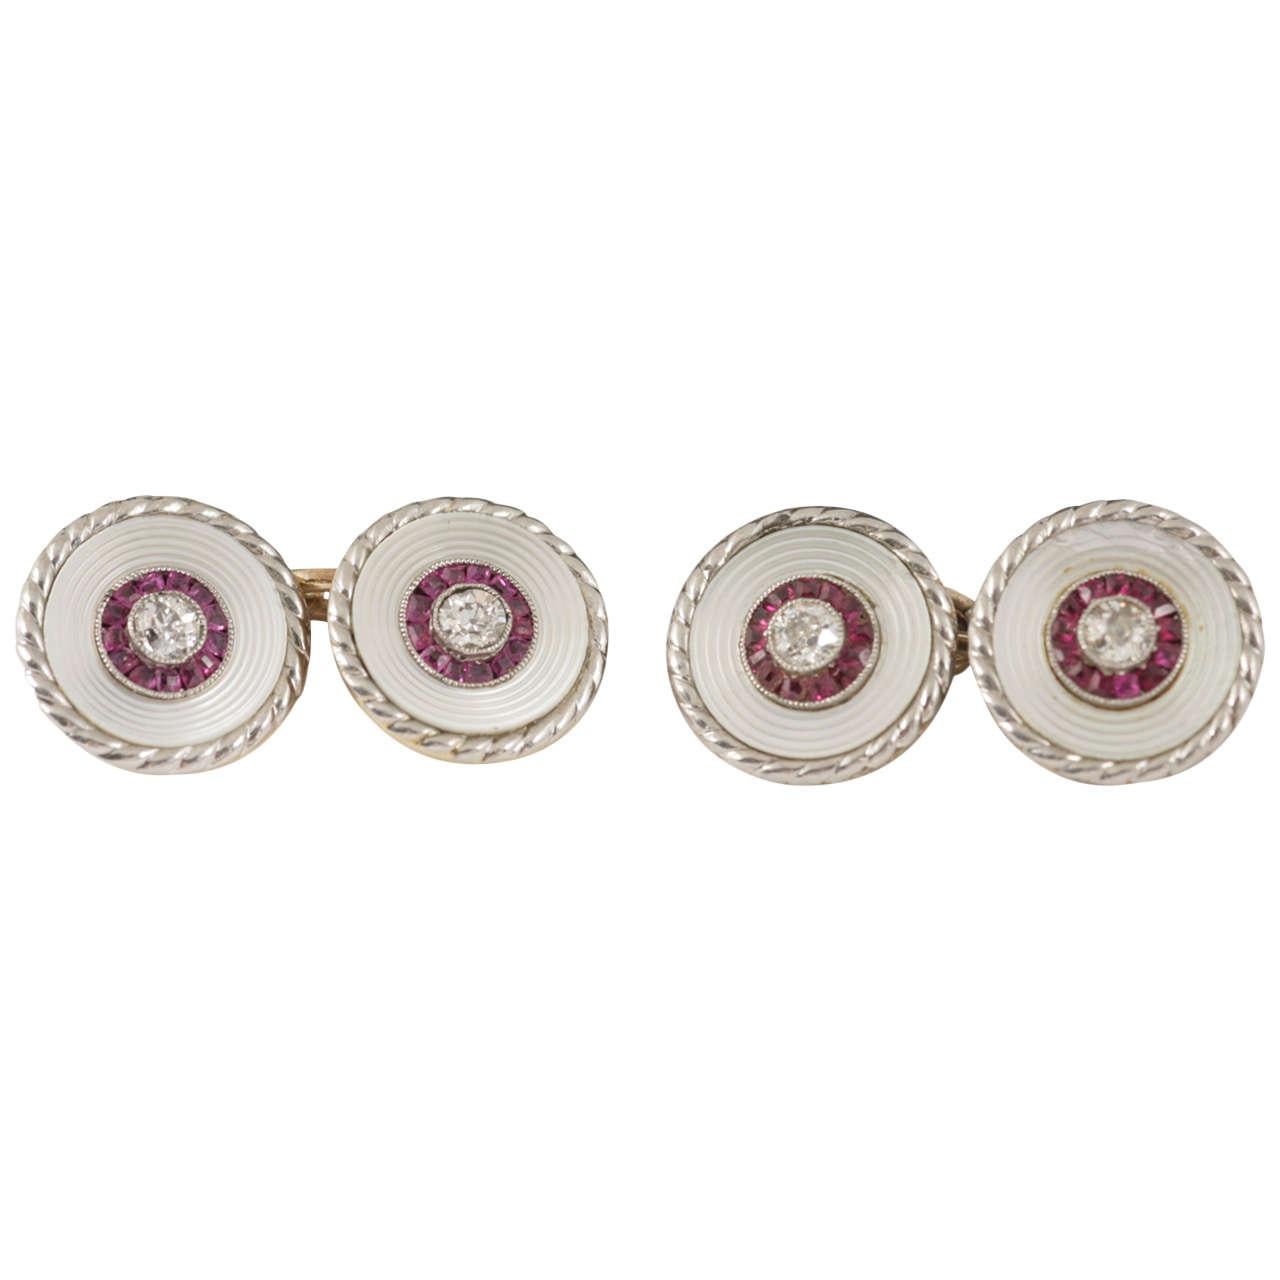 Cufflinks and Studs Gold, Mother of Pearl, Rubies, Diamonds, English, circa 1910